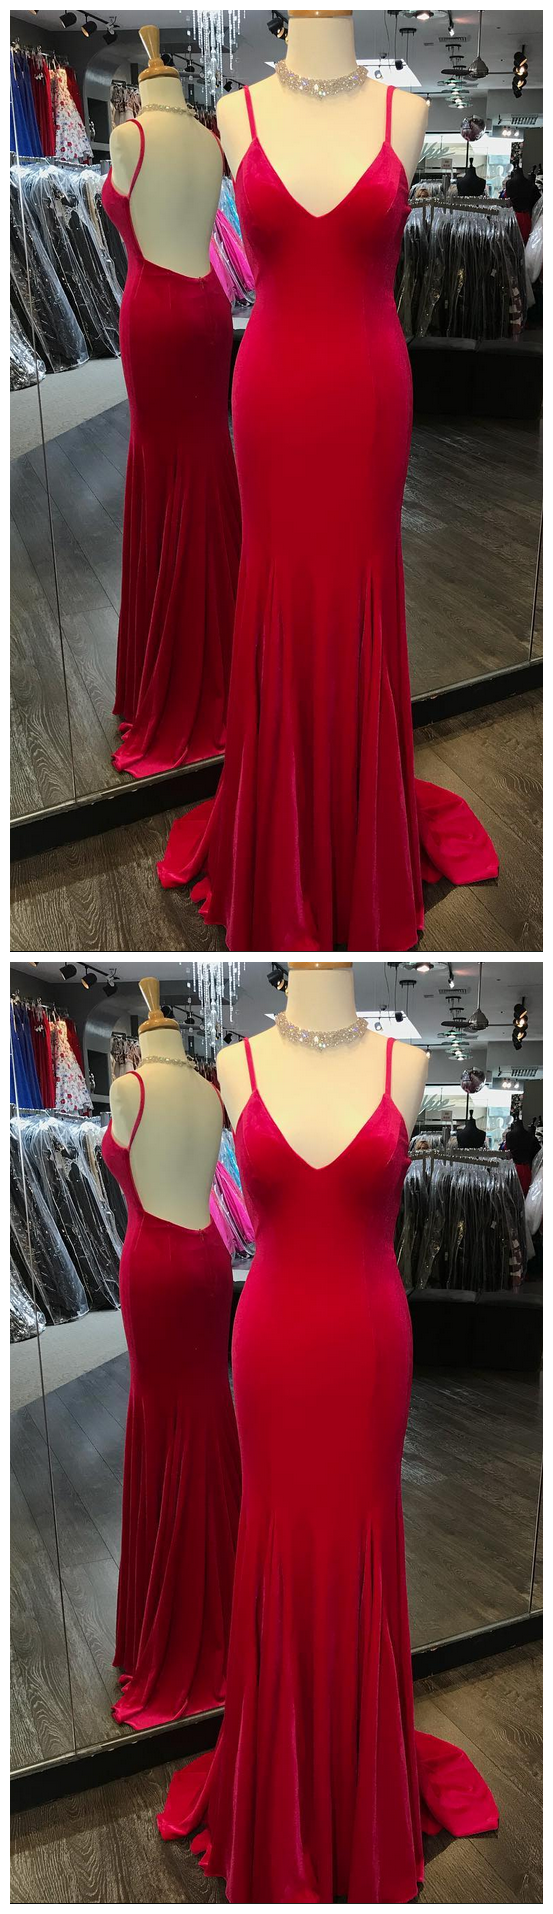 Red Mermaid Prom Dress, Sexy Backless Prom Dresses, Long Spaghetti Straps Evening Party Dress